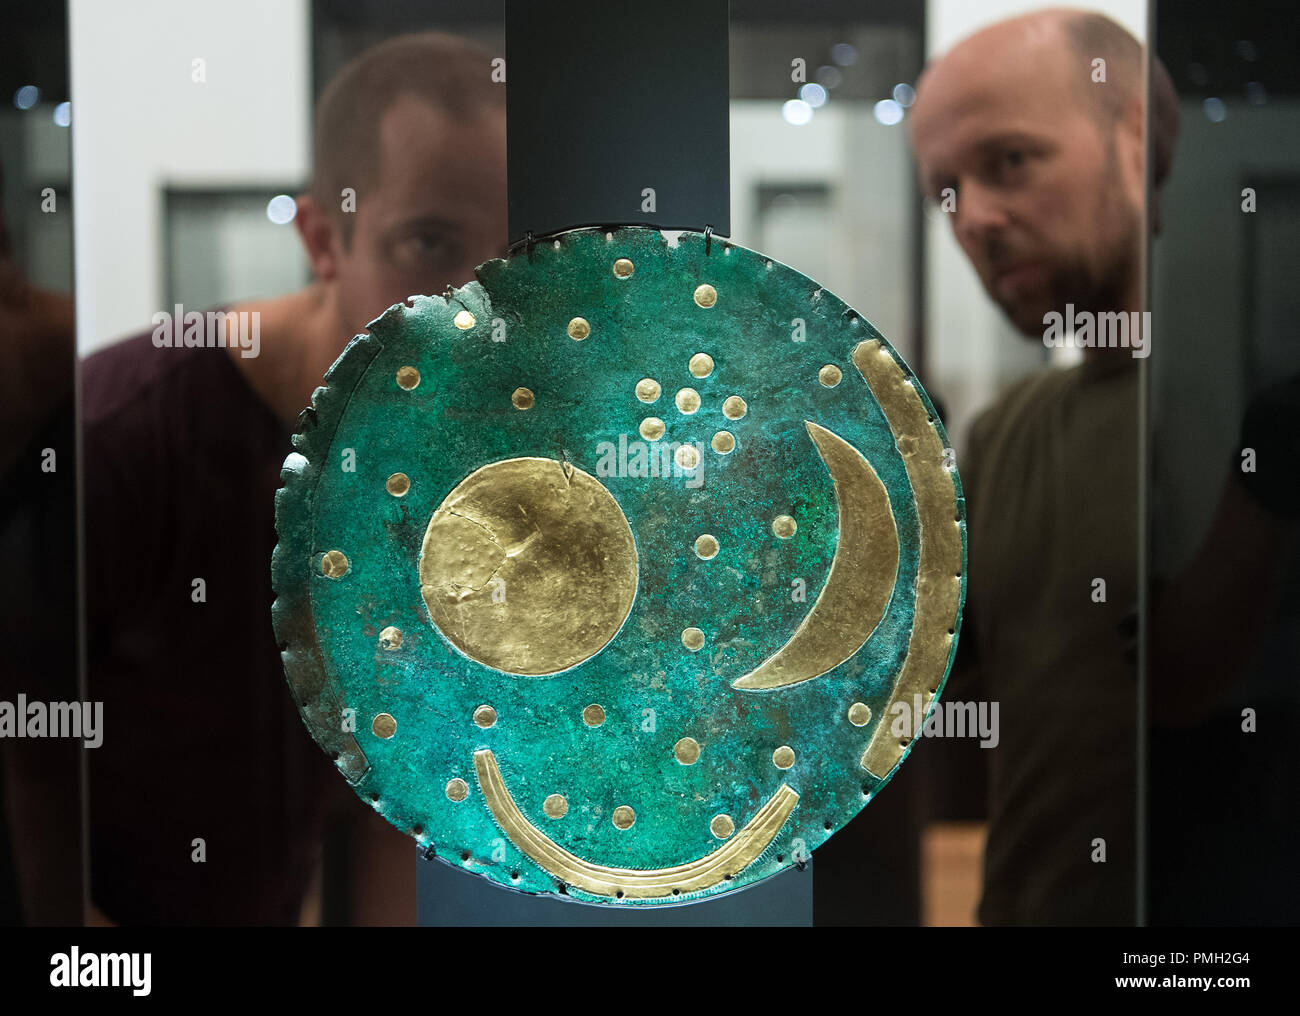 18 September 2018, Berlin: Exhibit designer Thomas Fißler (r) and Falk Lehmann of 'Fißler und Kollegen' from Leipzig install the Nebra Sky Disc in a showcase in the Martin-Gropius-Bau. The Bronze Age disc will be on display from 21.09.2018 together with about 1000 archaeological finds in the exhibition 'Moving Times. Archaeology in Germany'. Photo: Soeren Stache/dpa Stock Photo